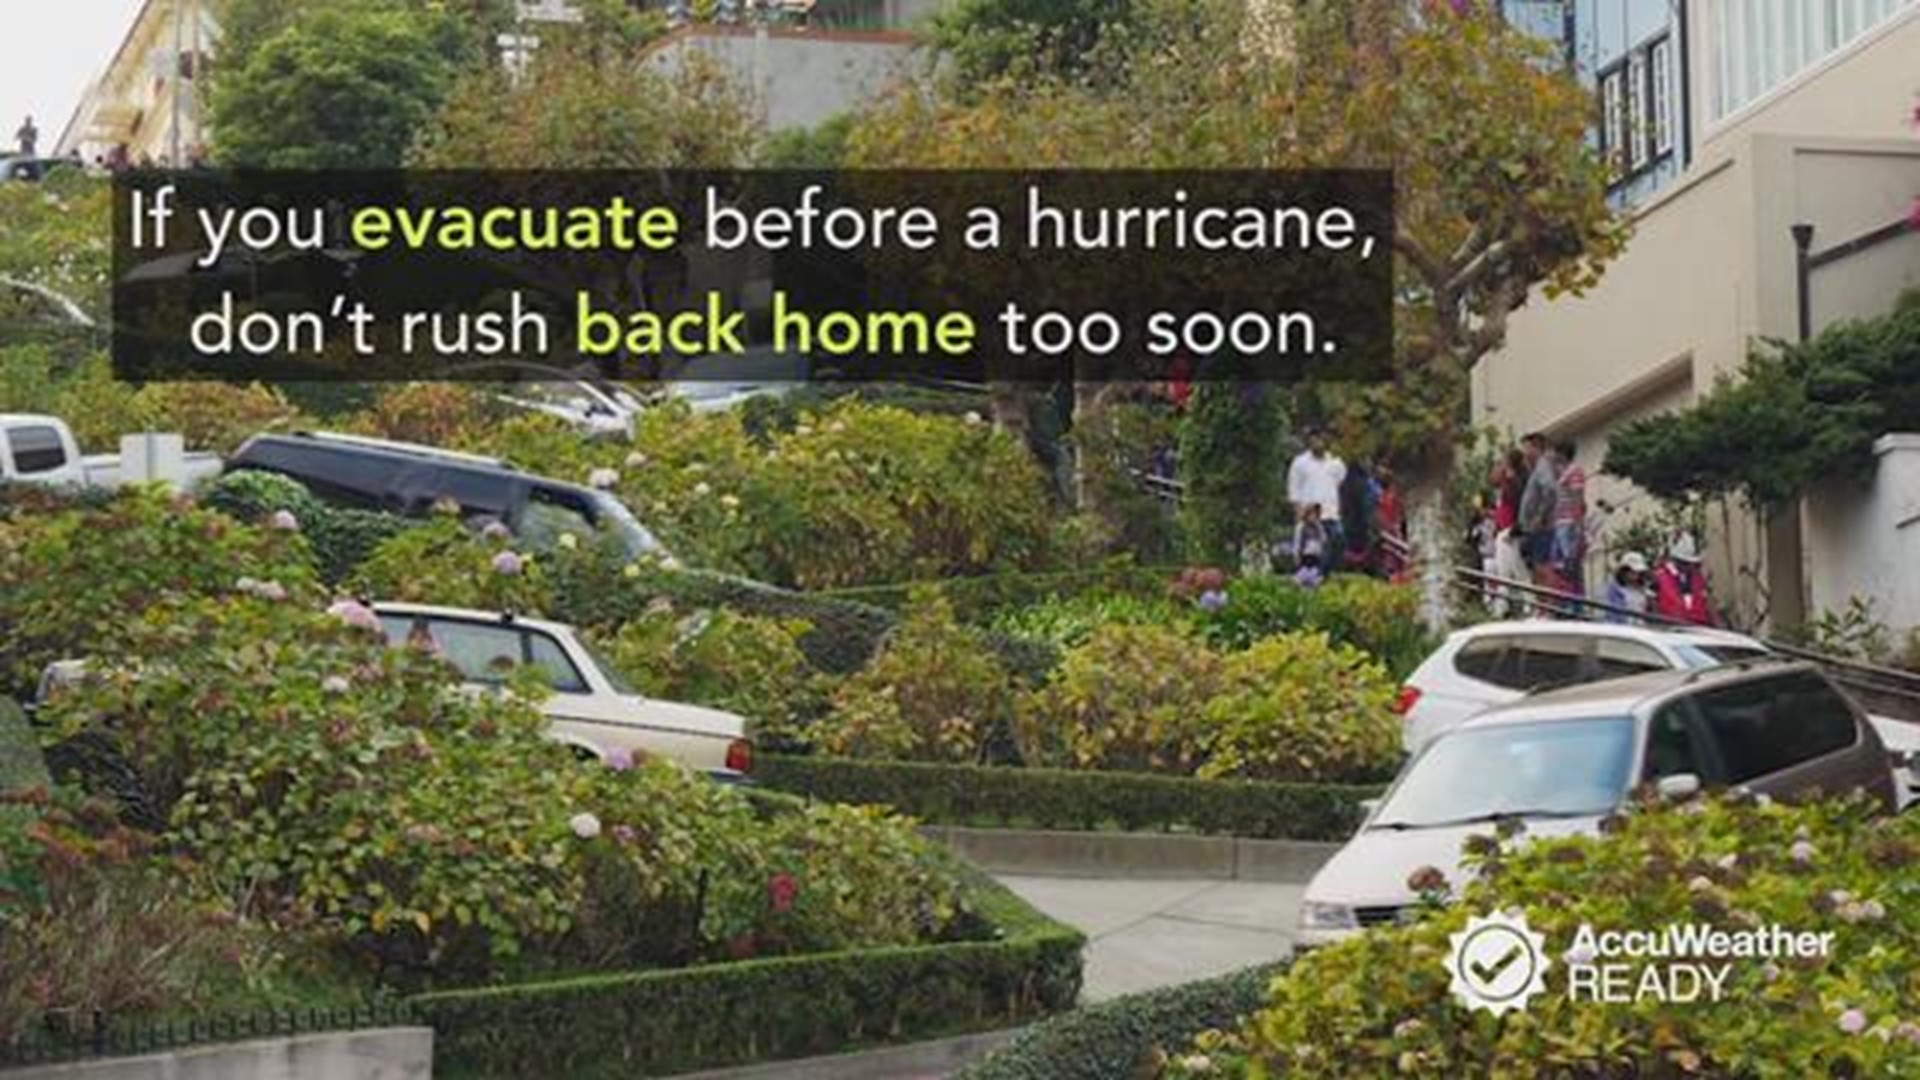 Emergency management experts recommend holding off on heading back into your area after an evacuation, as a number of hazards could still be present in the early days following a major storm.